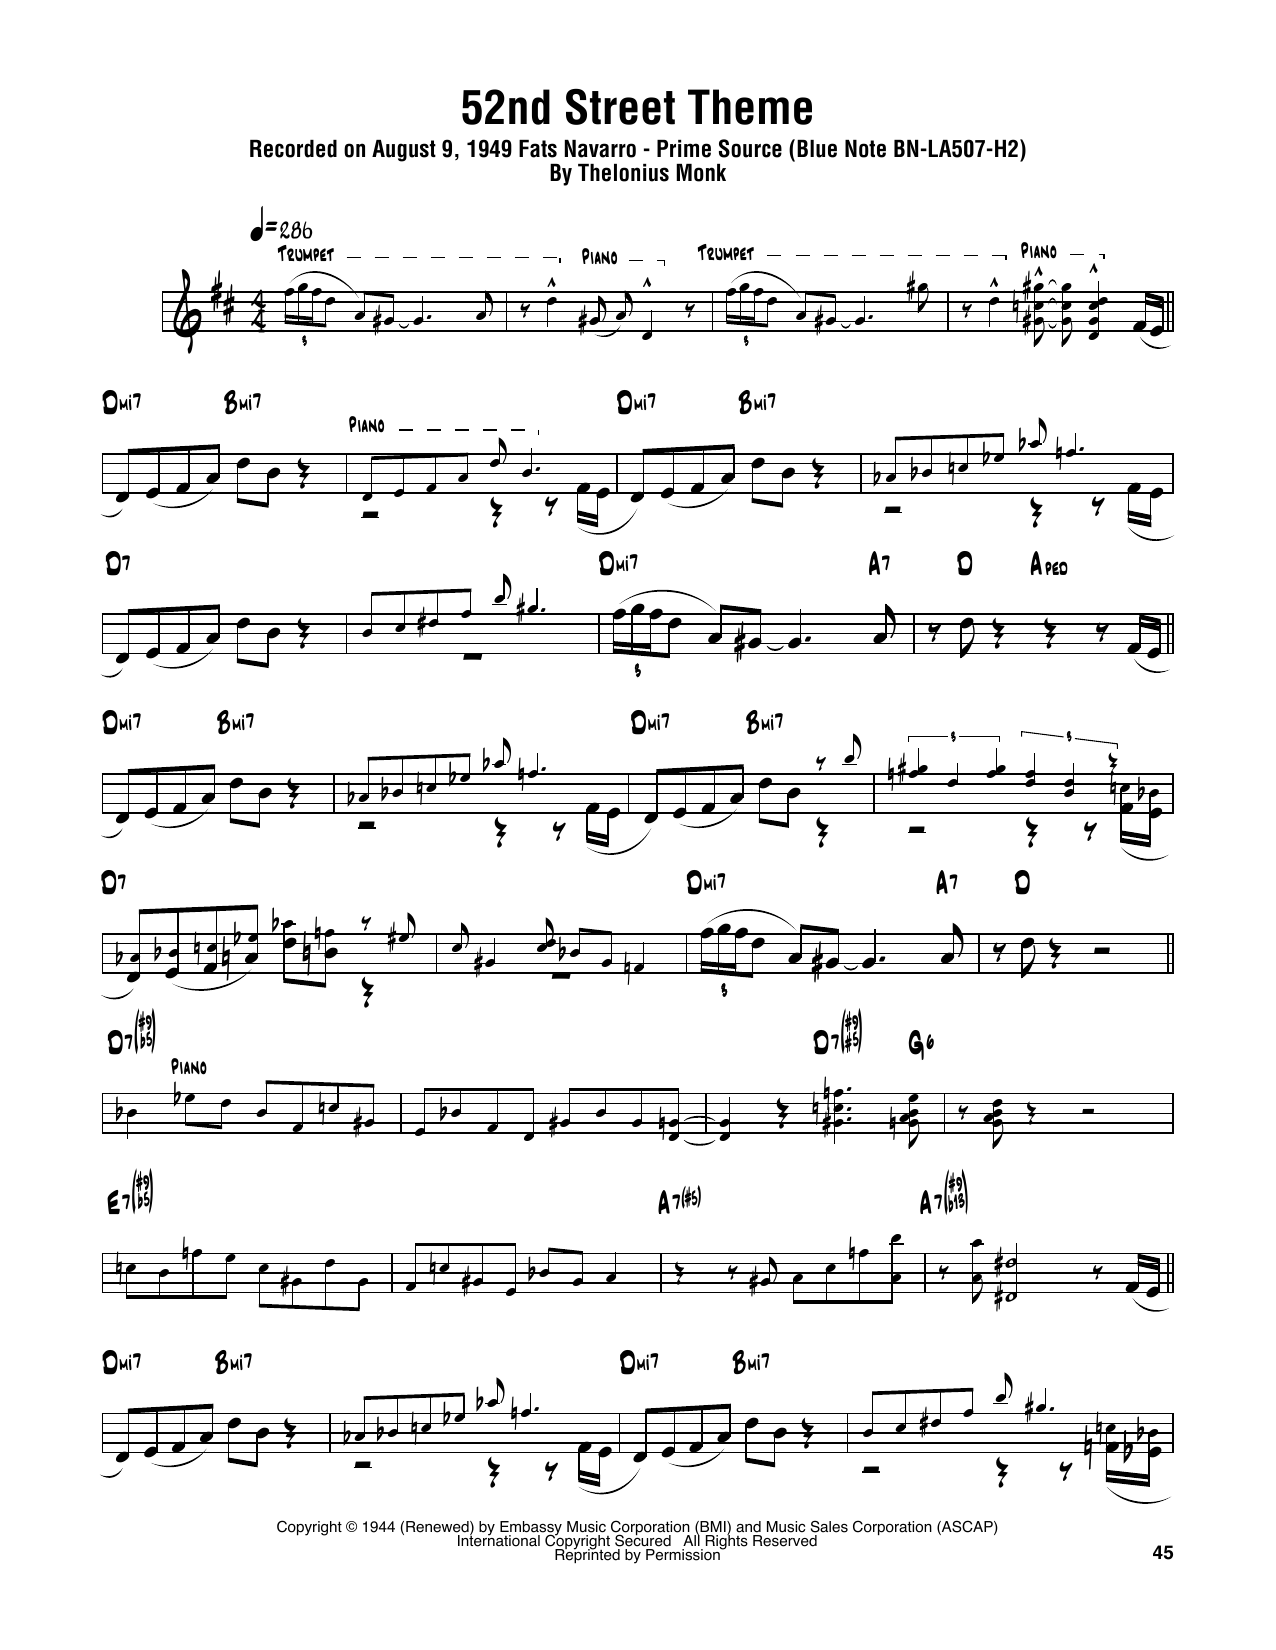 Download Sonny Rollins 52nd Street Theme Sheet Music